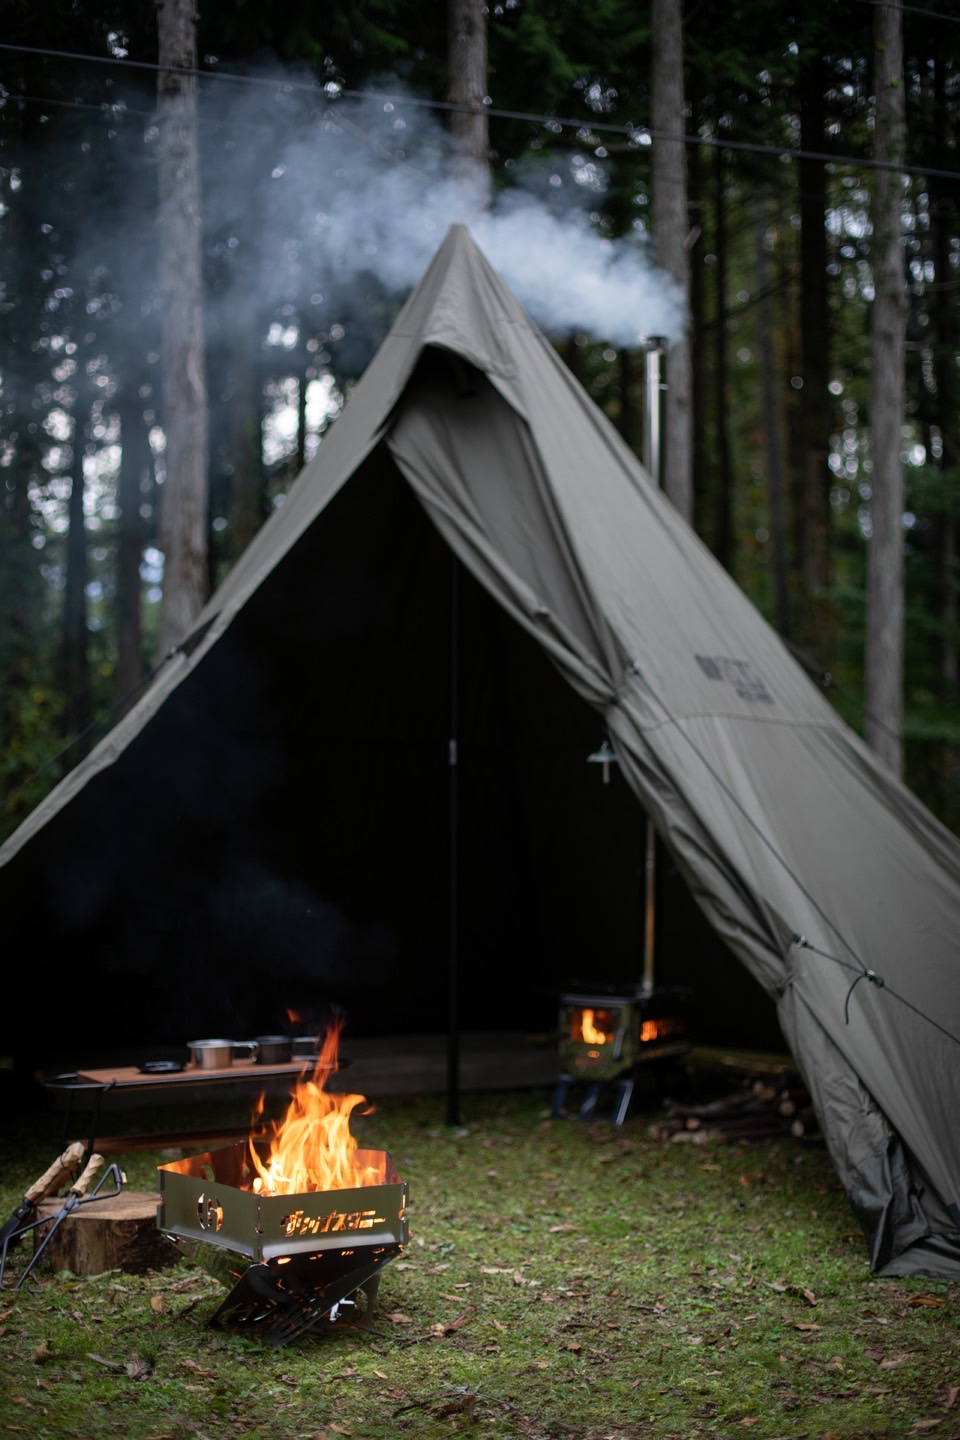 GRIP SWANY FIRE PROOF GS MOTHER TENT 2022年のクリスマス - テント ...